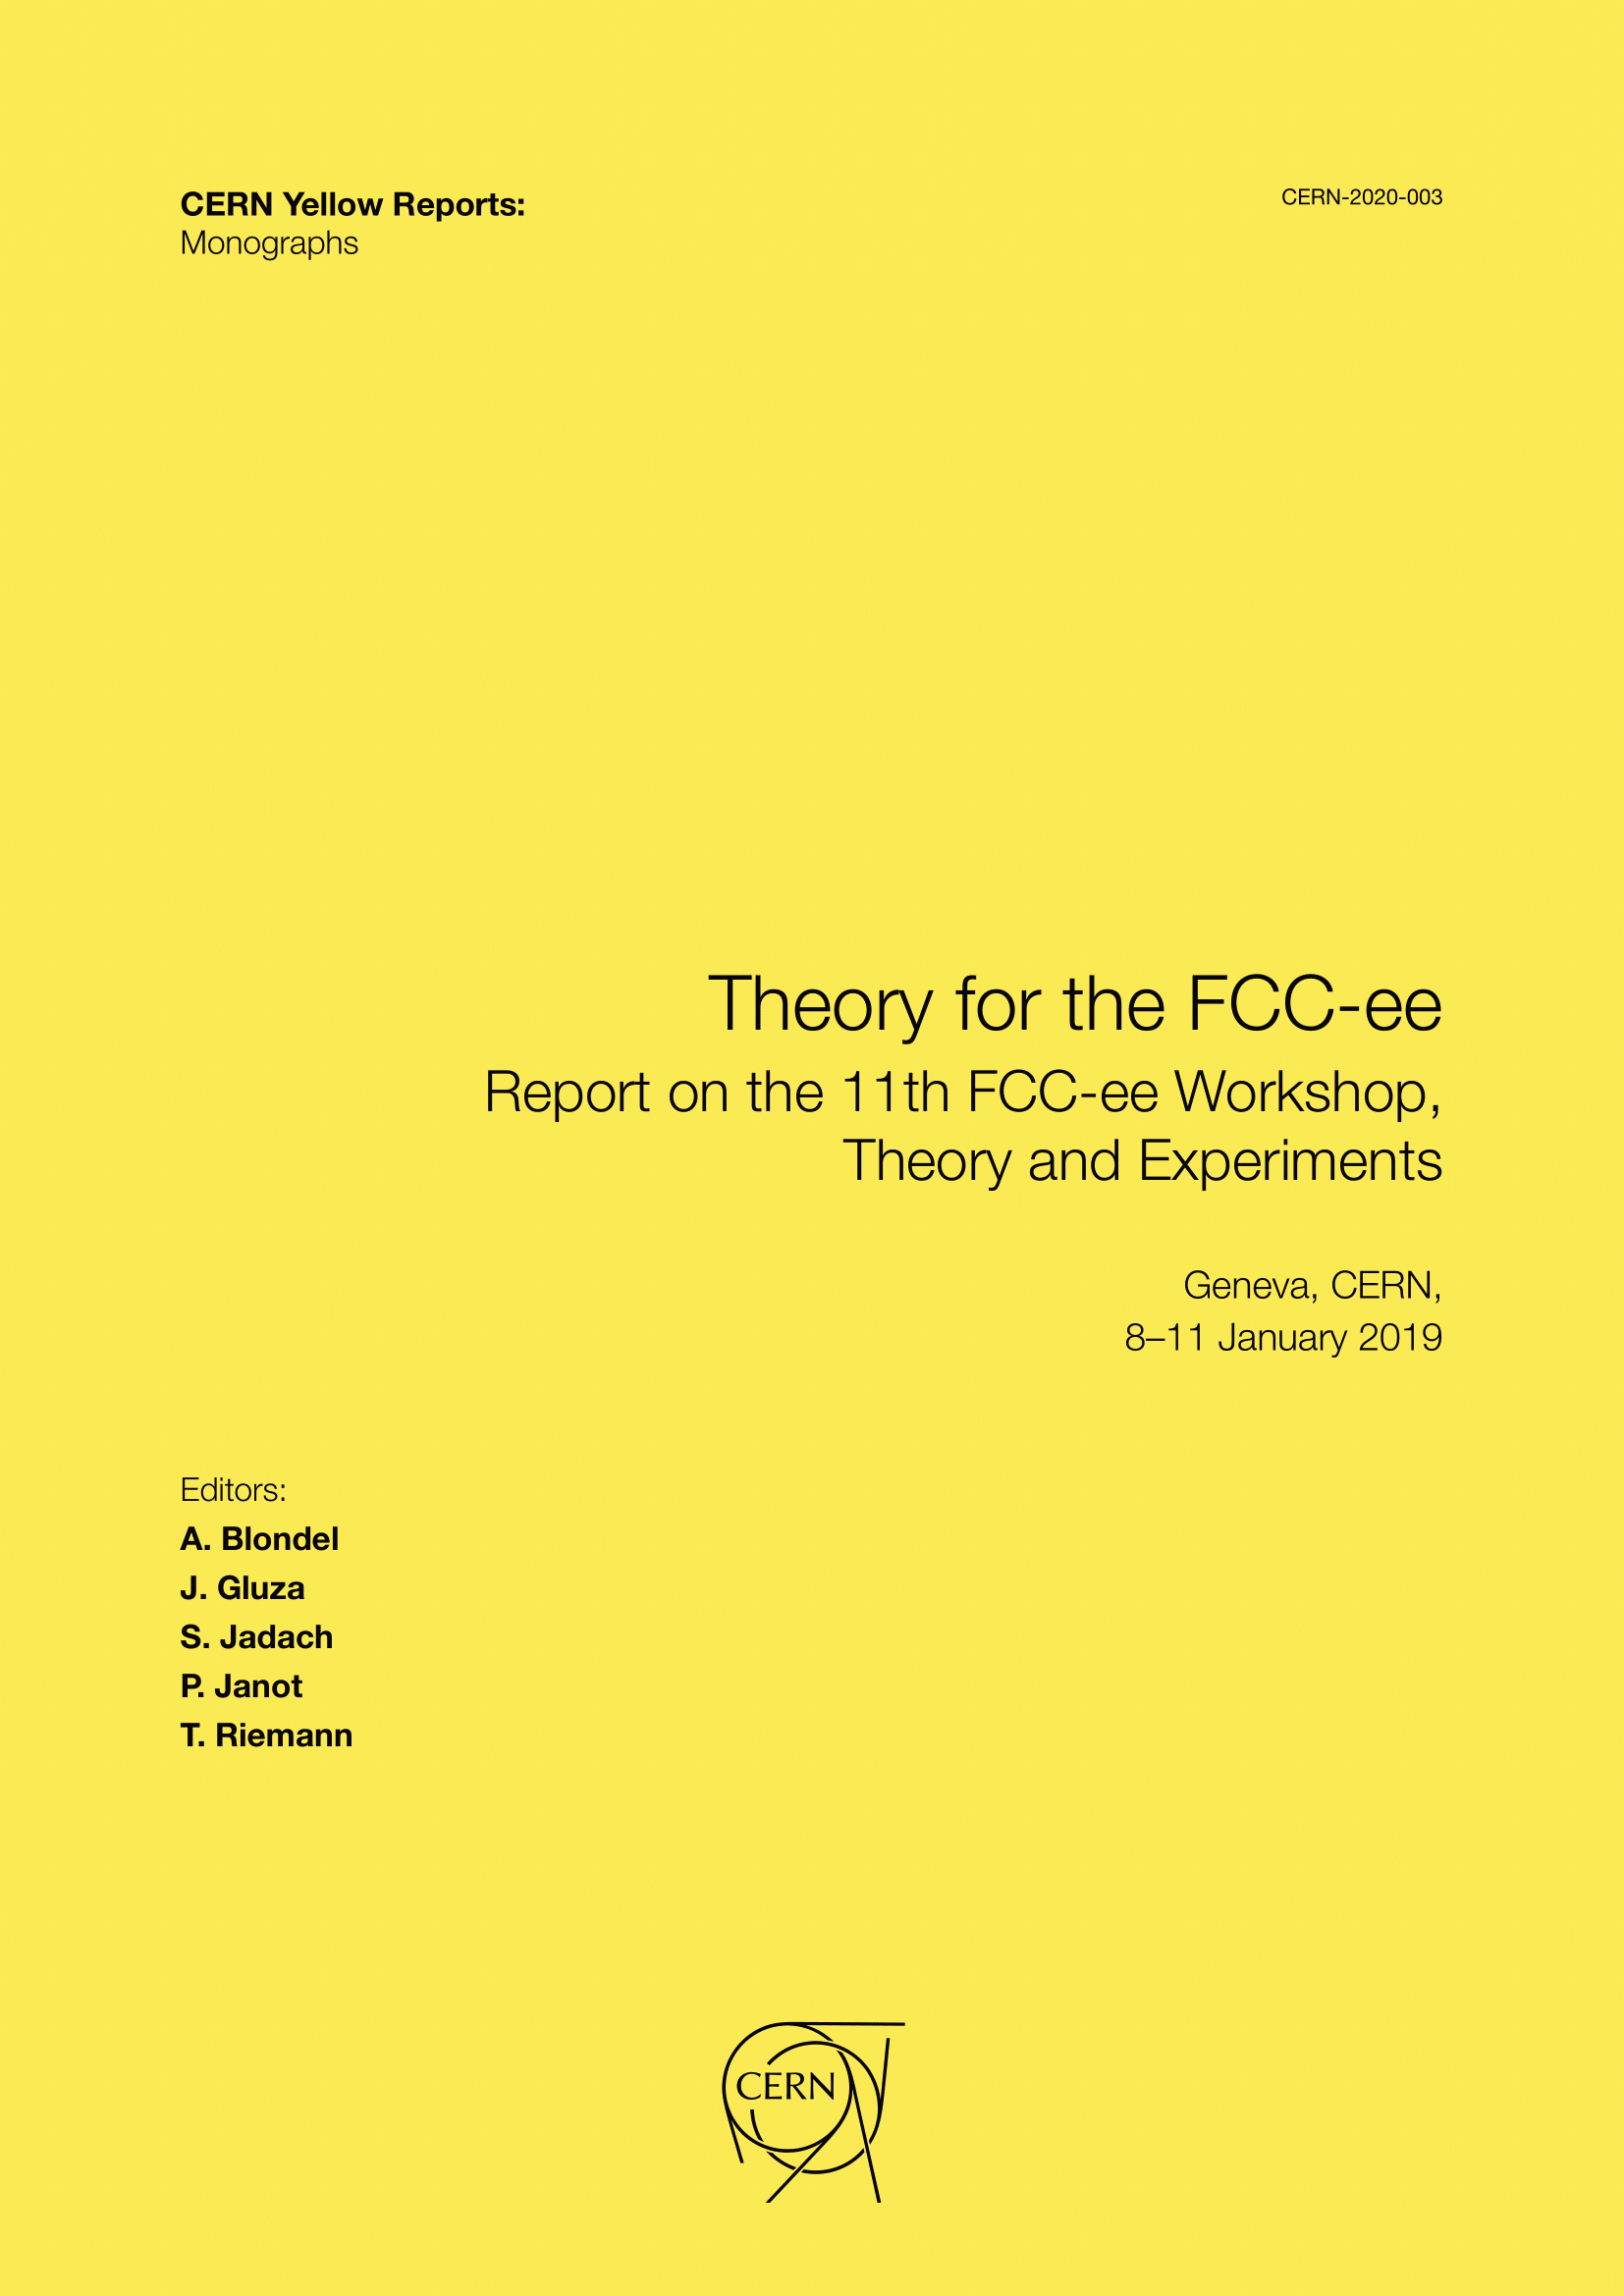 					View Vol. 3 (2020): Theory for the FCC-ee: Report on the 11th FCC-ee Workshop, Theory and Experiments, CERN, Geneva, 8–11 January 2019
				